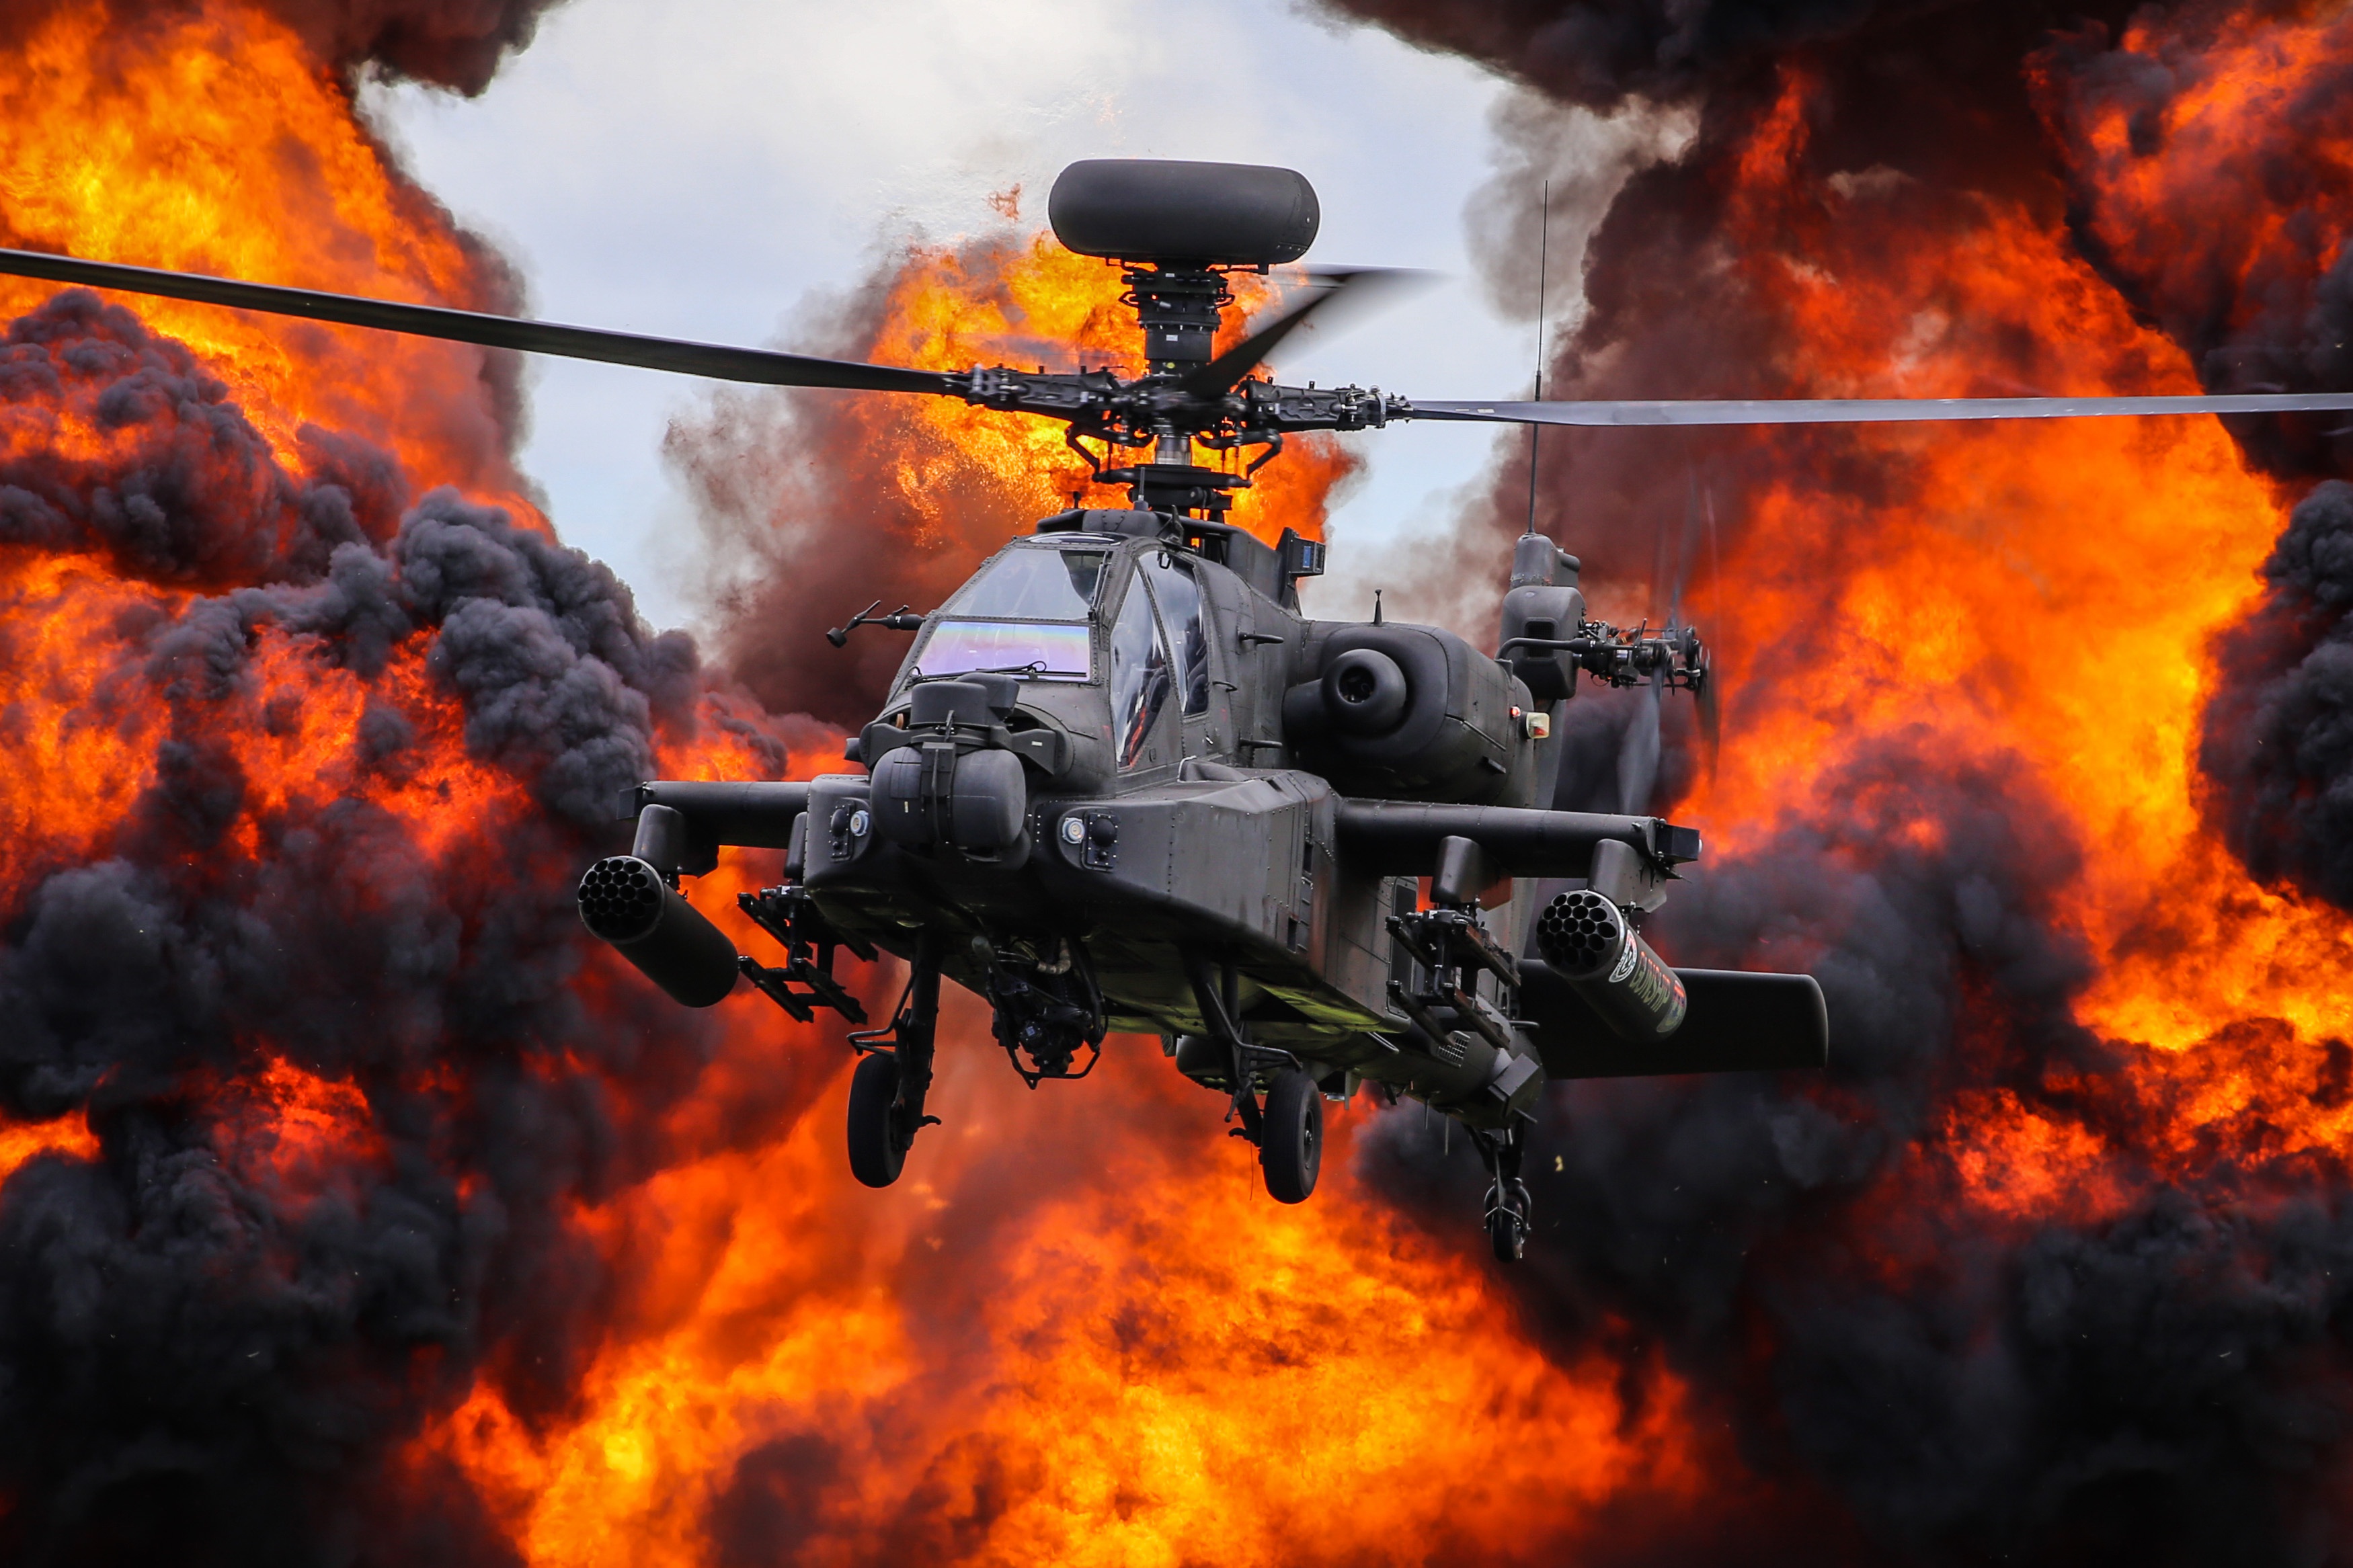 Free download wallpaper Helicopter, Aircraft, Military, Boeing Ah 64 Apache, Attack Helicopter, Military Helicopters on your PC desktop